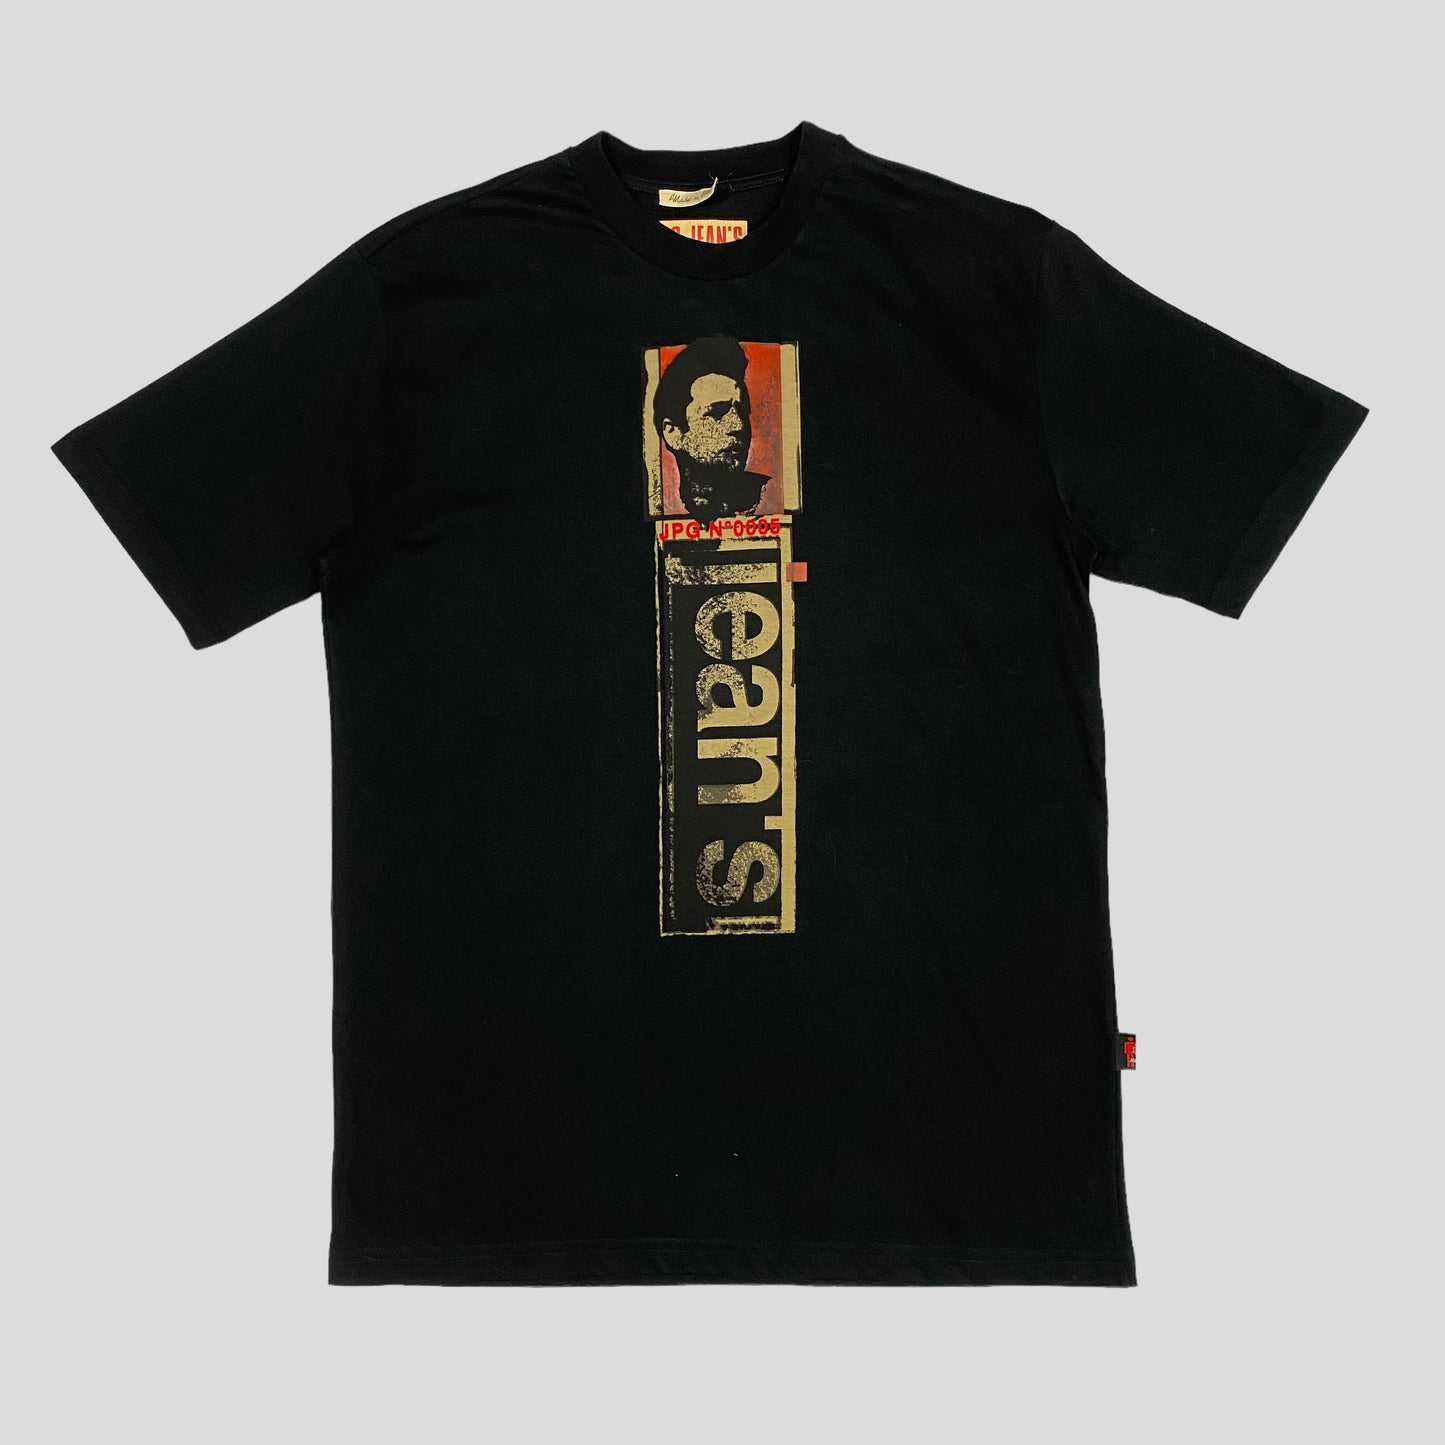 JPG Jeans SS2003 No0005 Graphic T-shirt - L